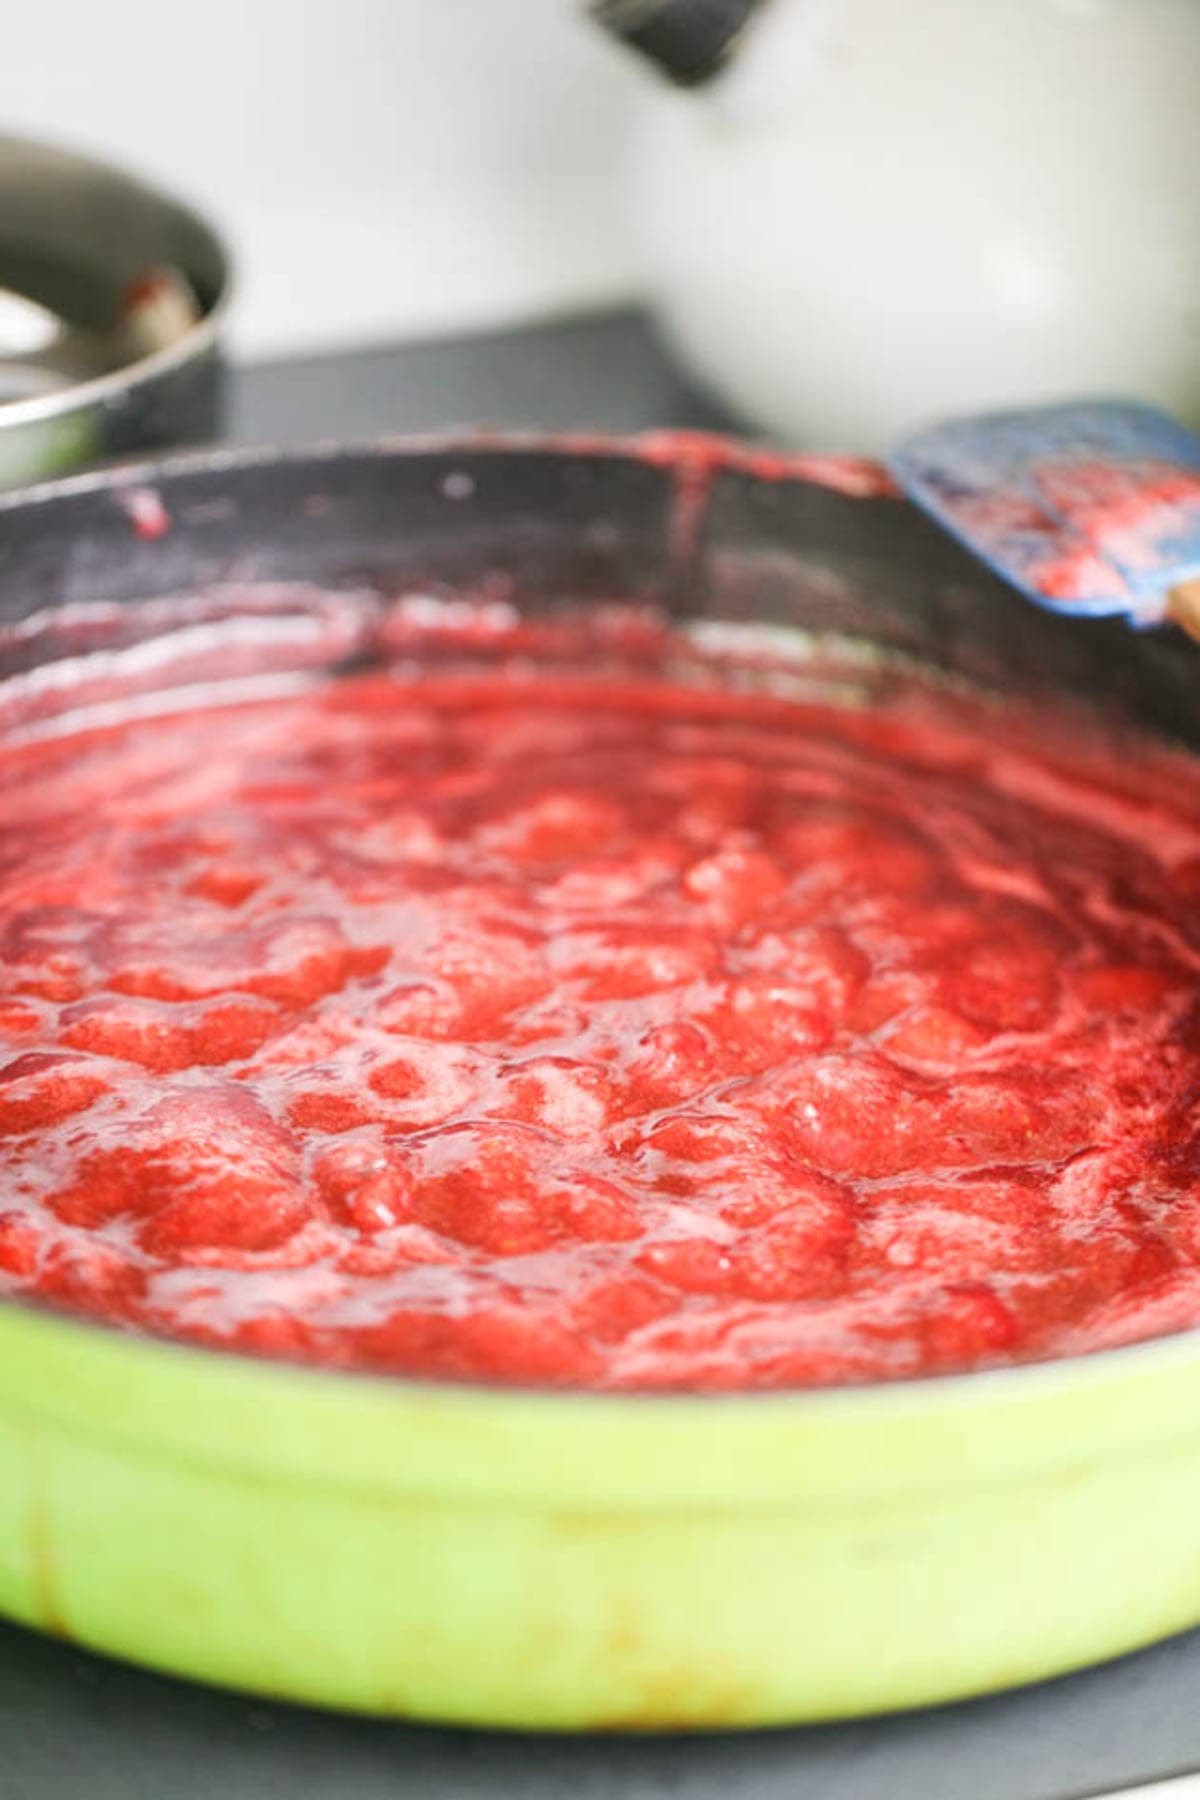 jam is ready in the pan